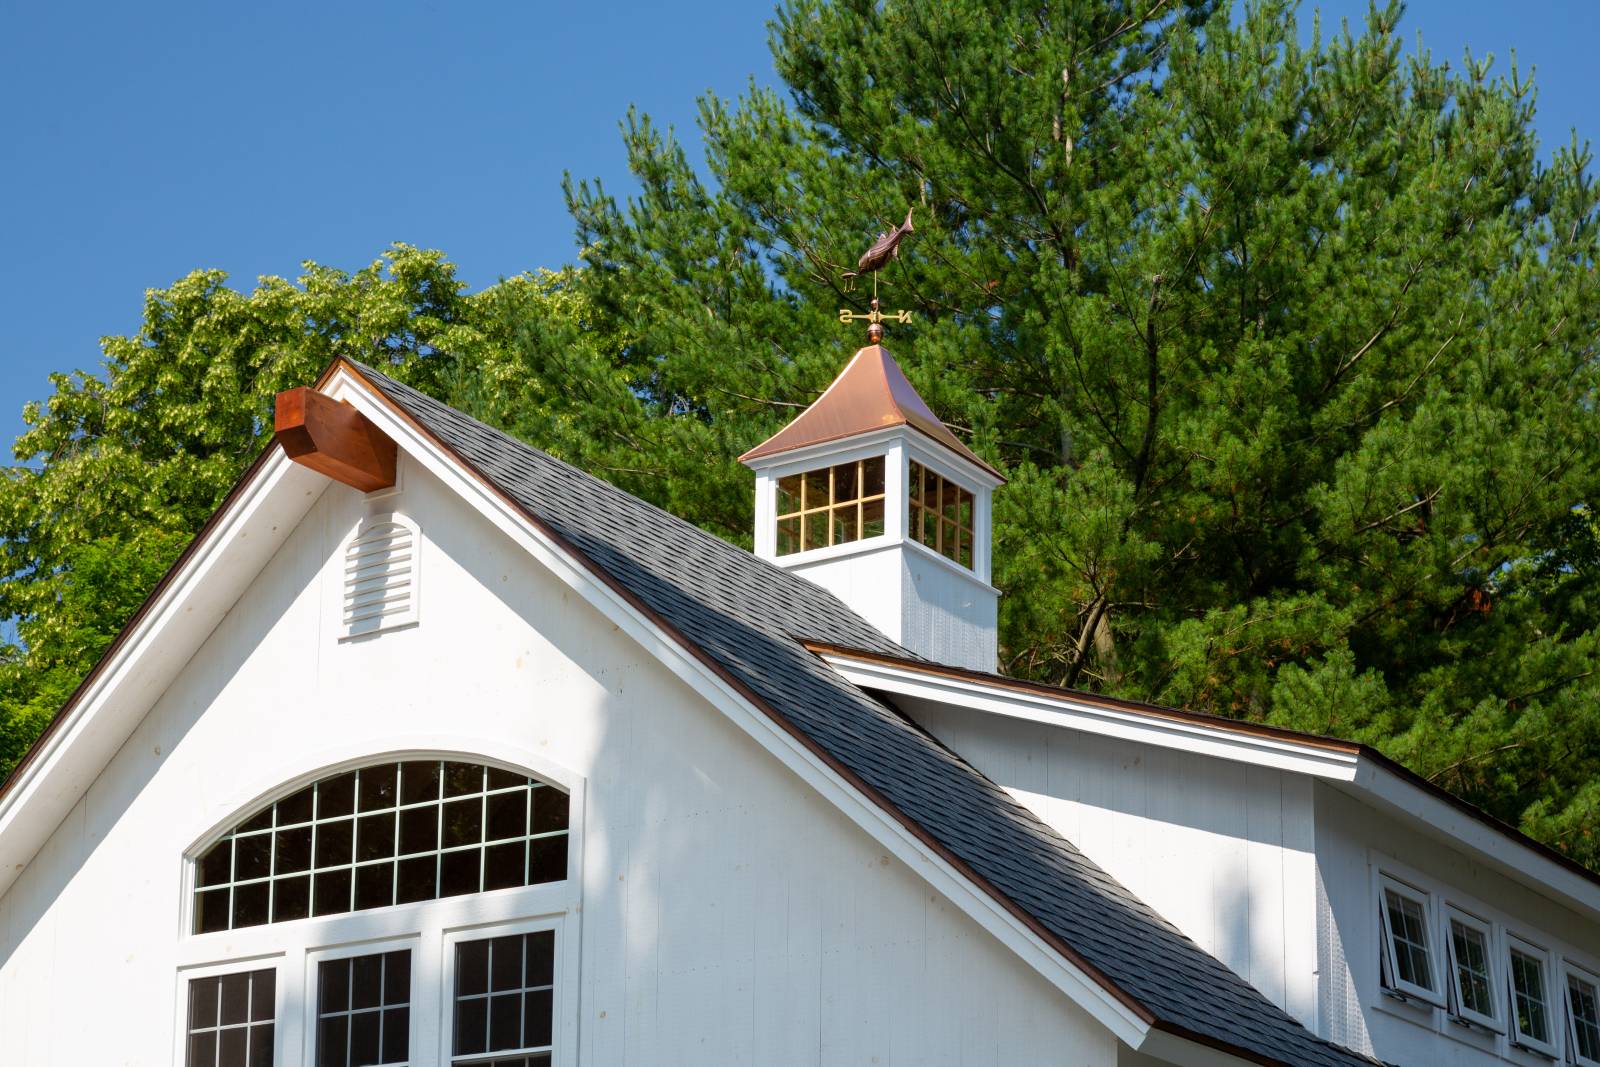 Barn Details: Cantilever Ridge Beam • Bow-Top Window • Transom Dormer • Copper Top Cupola with Weathervane